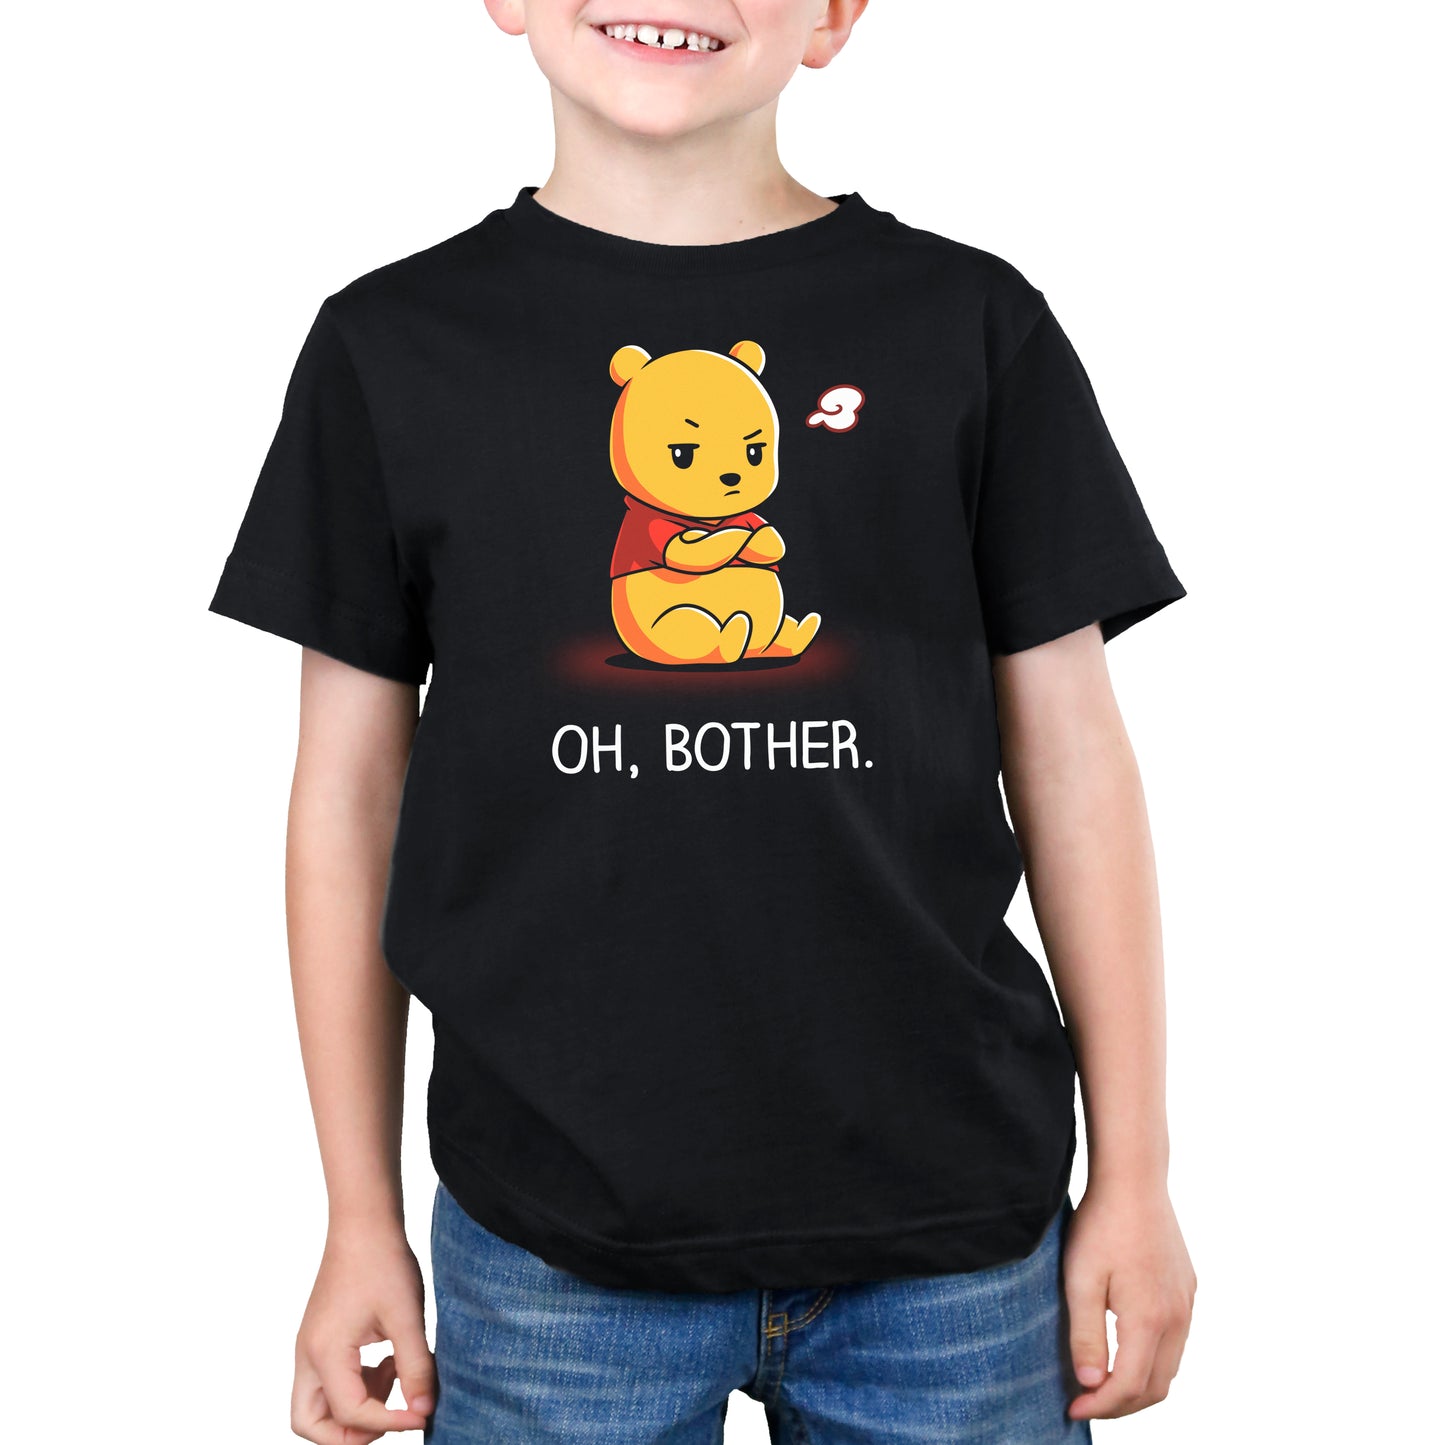 Officially Licensed Oh, Bother Winnie the Pooh T-shirt.